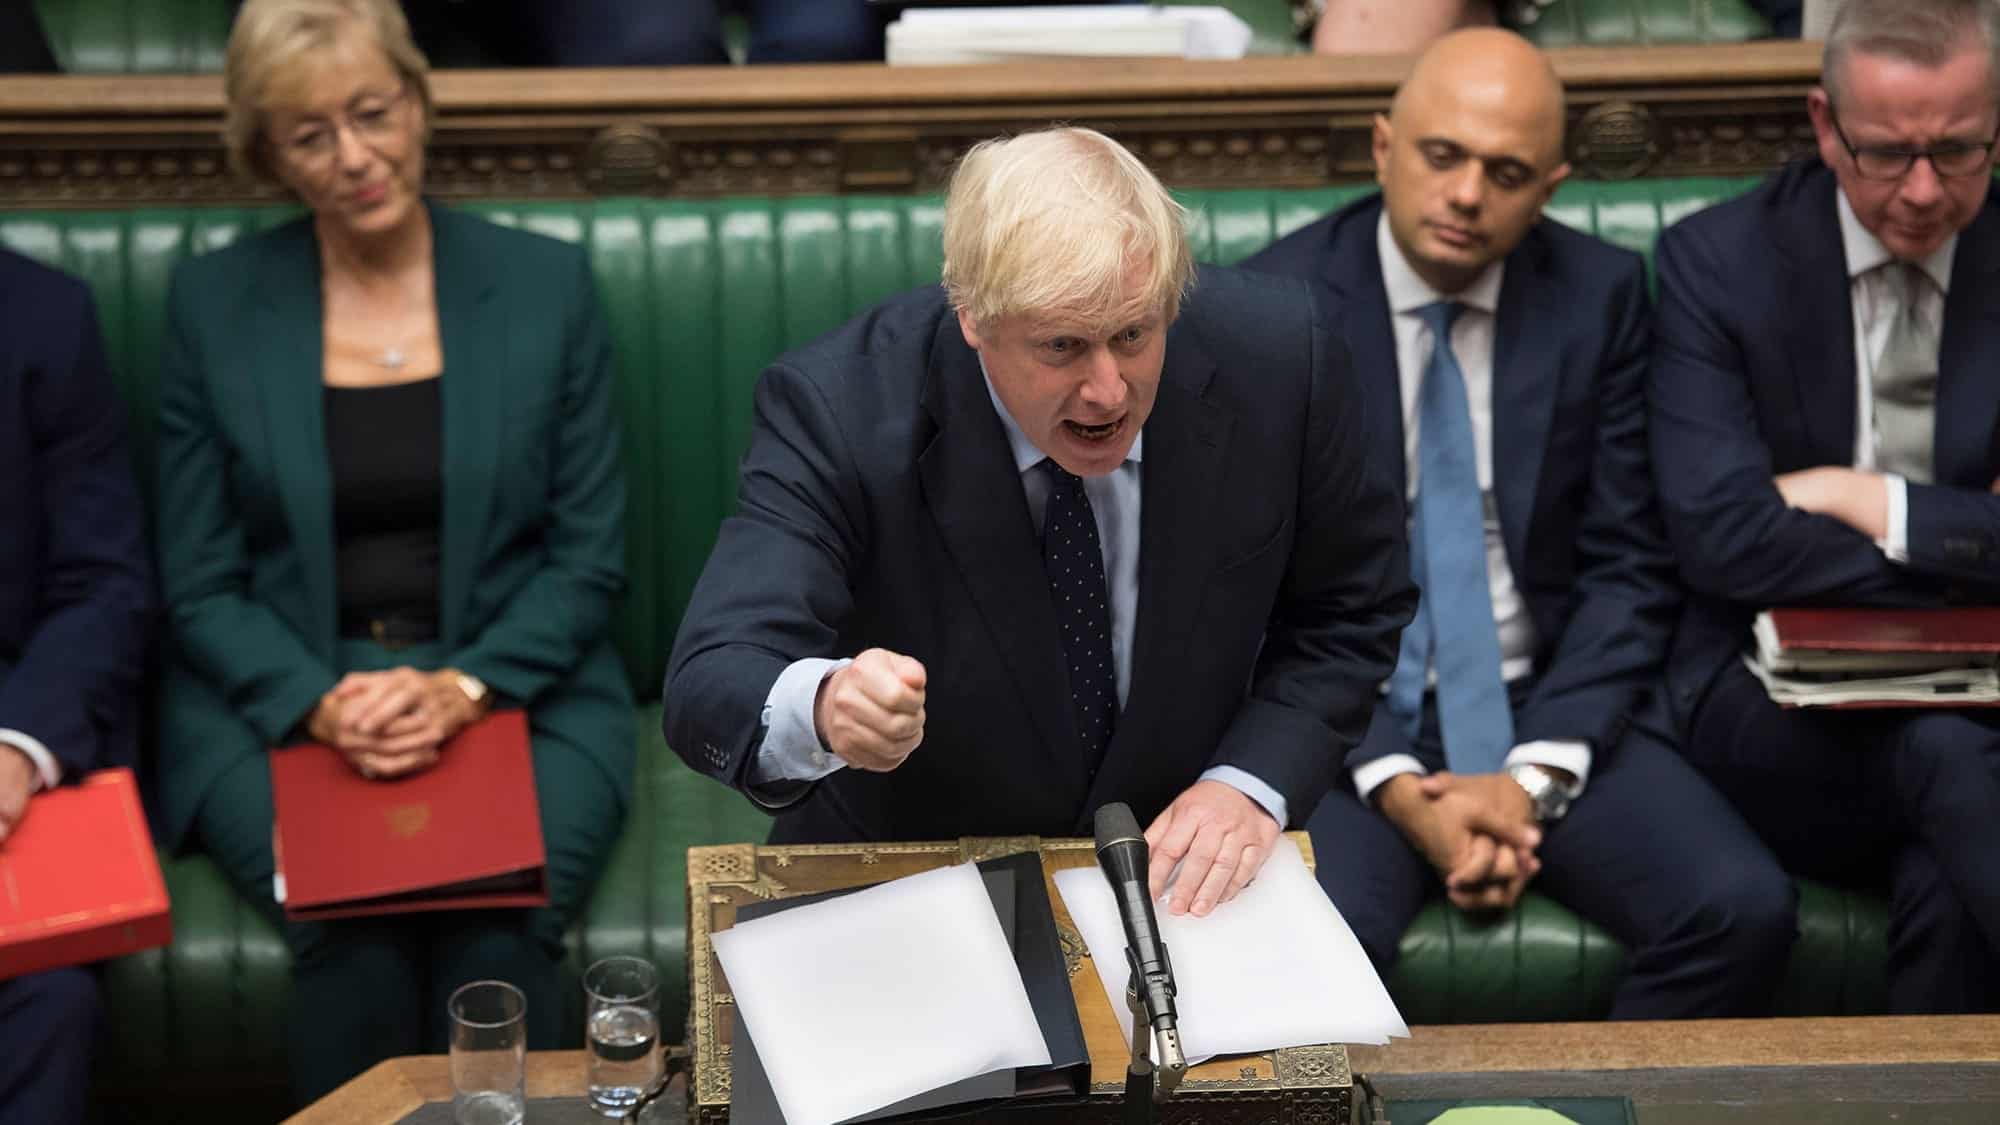 Boris Johnson strongly dismissing the supreme court's ruling that the suspension was illegal.